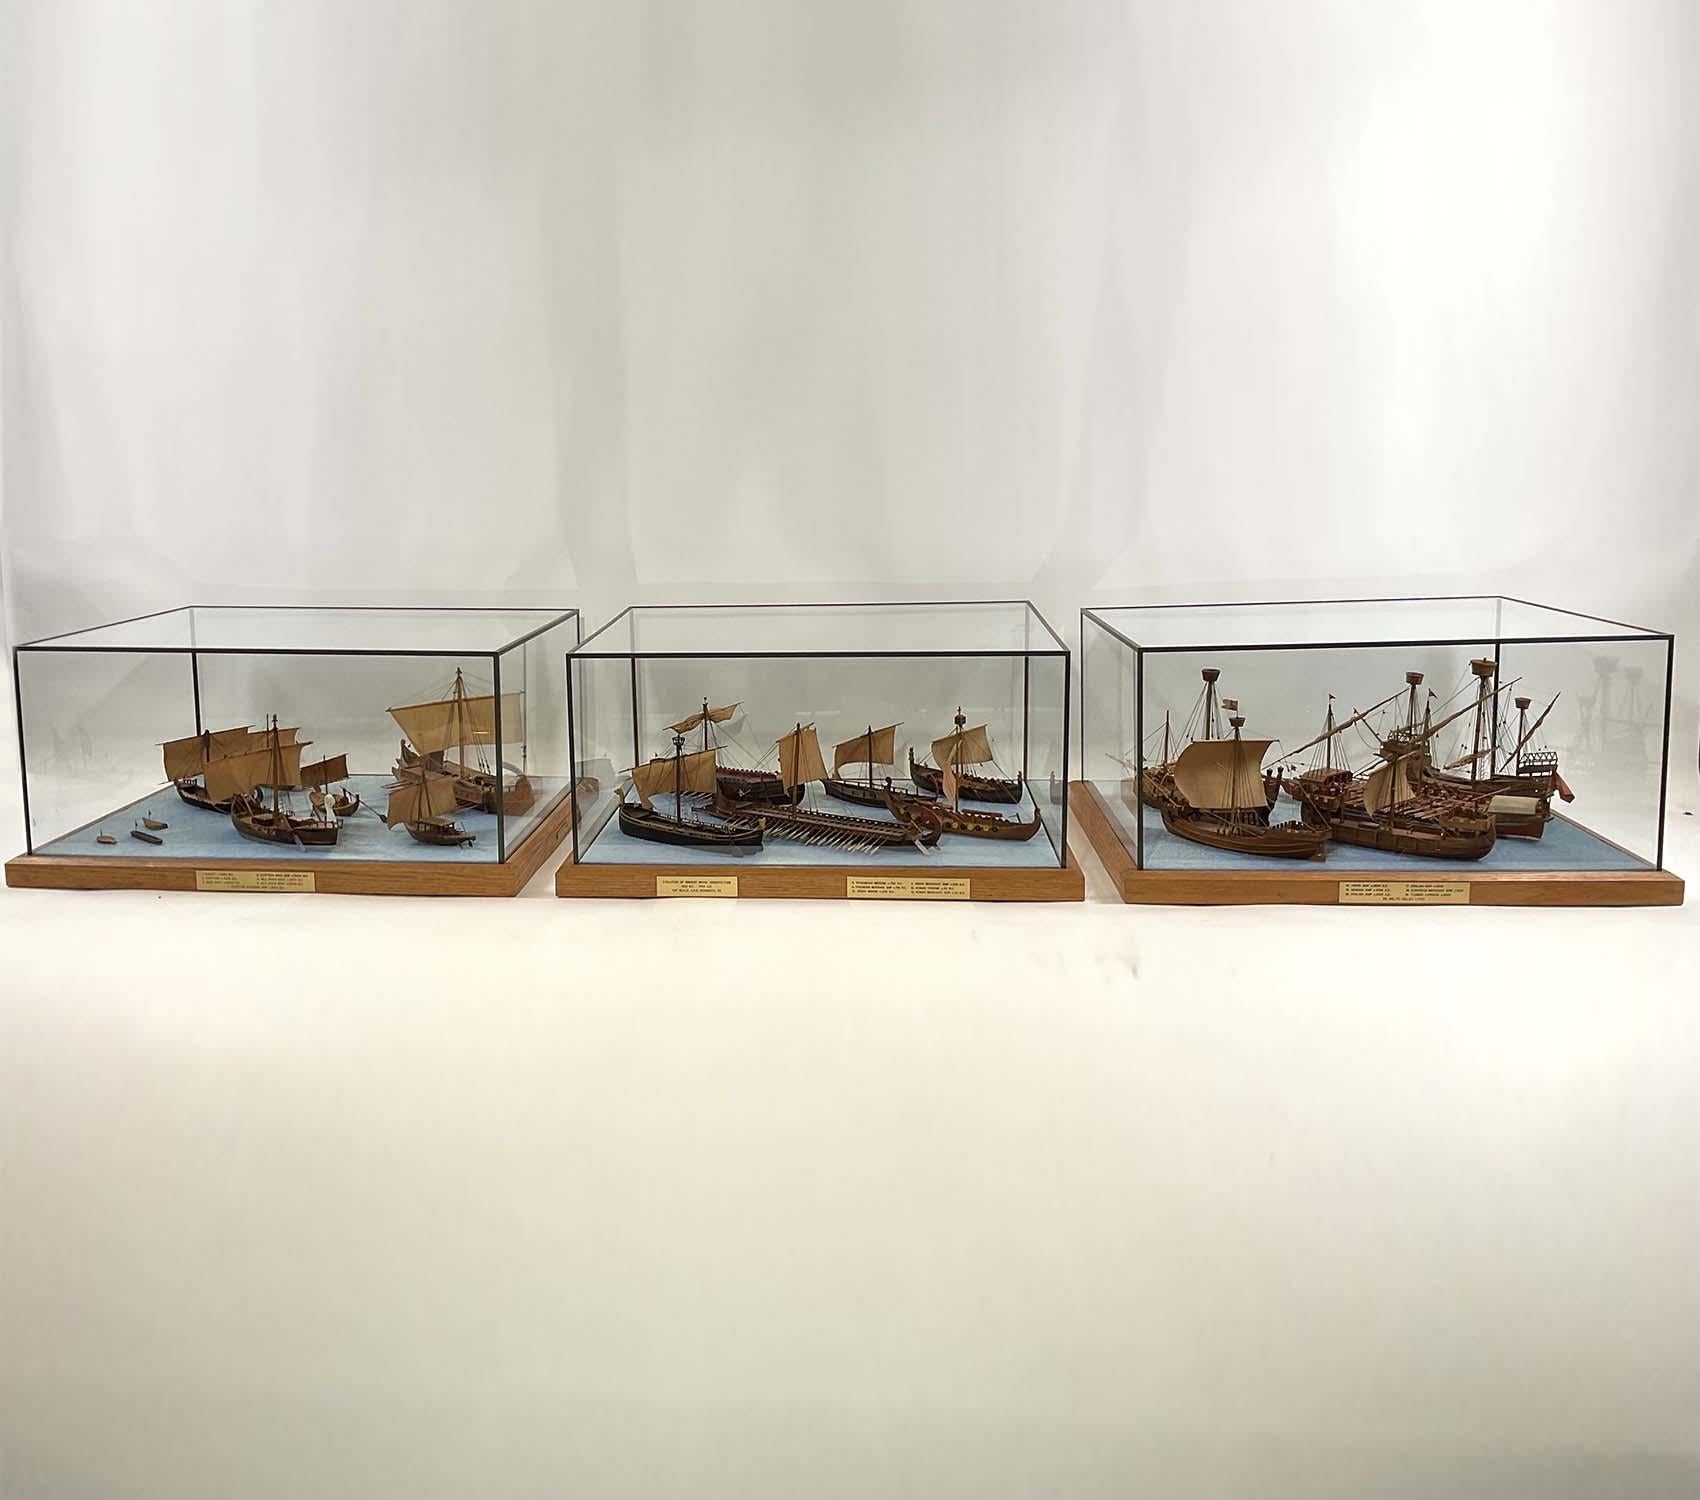 Three display cases of twenty 1/8 scale ancient naval models. Represents ships from the Evolution of Ancient Naval Architecture 750 BC - 1700 AD collection, 1/8th scale, E.A.R. Ronnberg, Sr. With gallery tag from the American Marine Model Gallery,